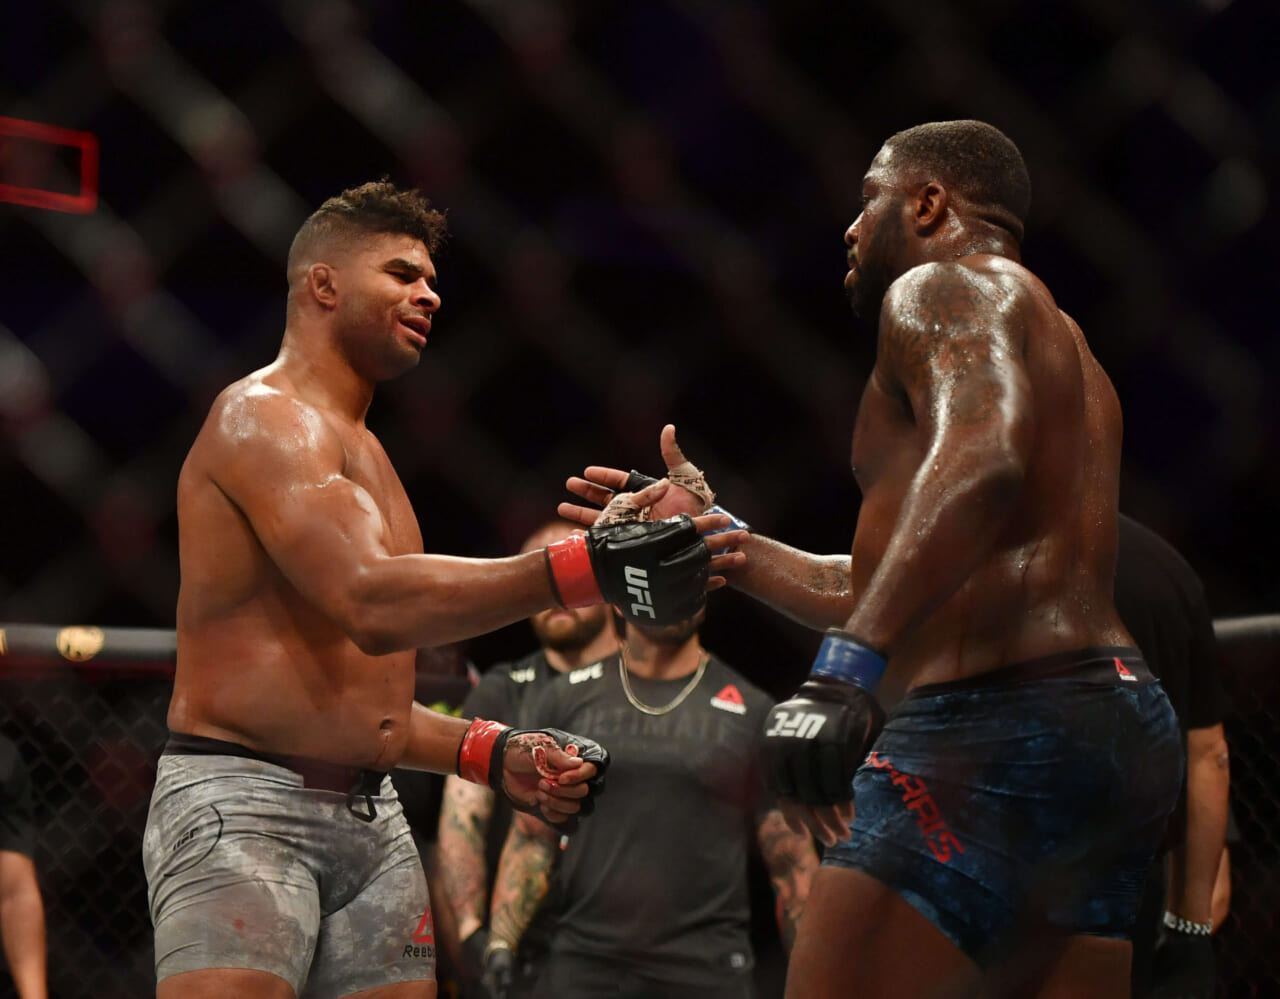 Bellator looking at signing Alistair Overeem and Junior Dos Santos